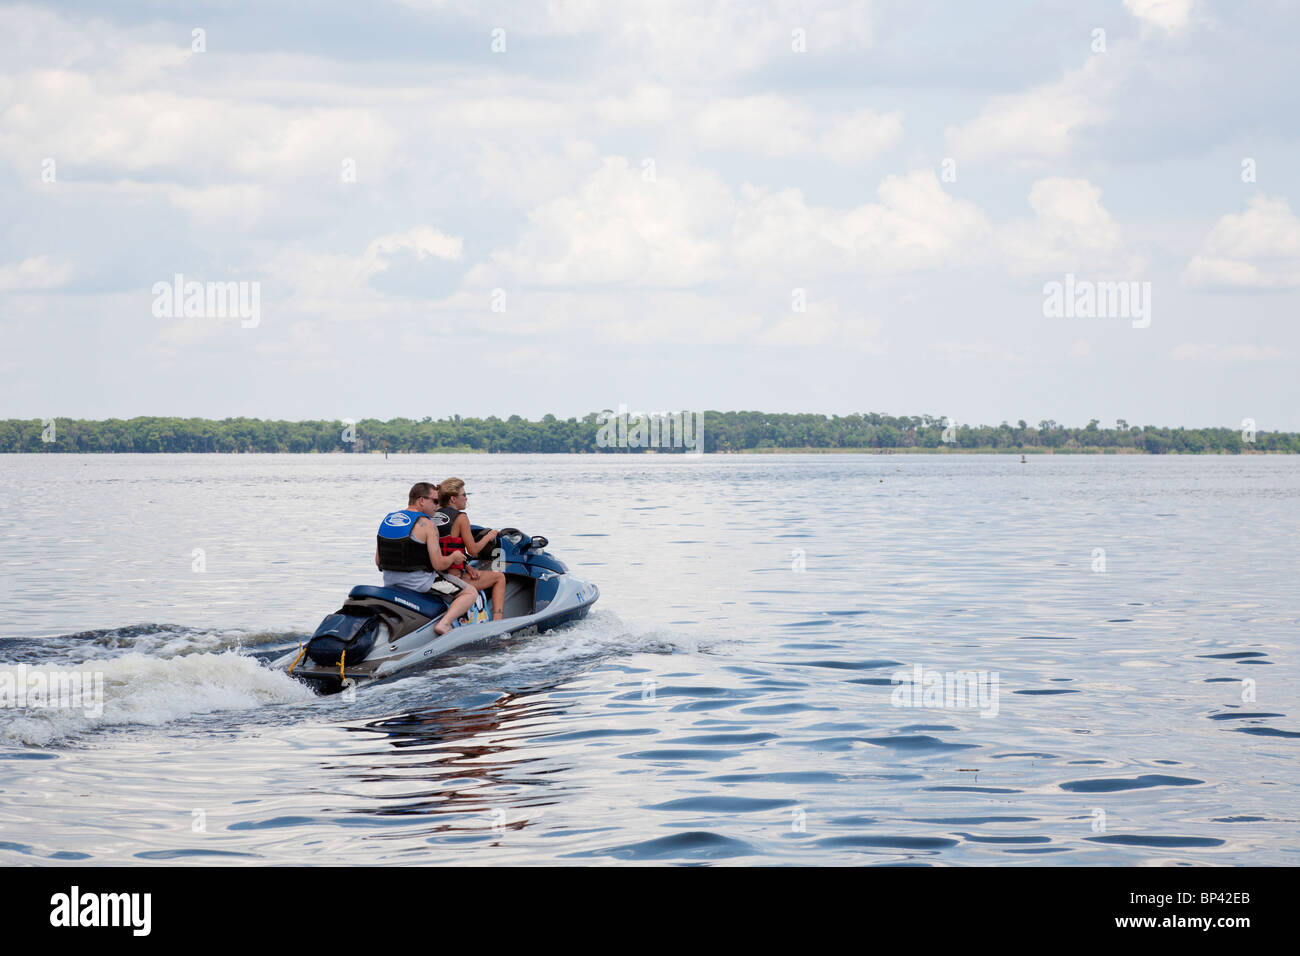 Lake George, FL - May 2010 - Man sits behind woman driving a personal watercraft on Lake George in central Florida Stock Photo